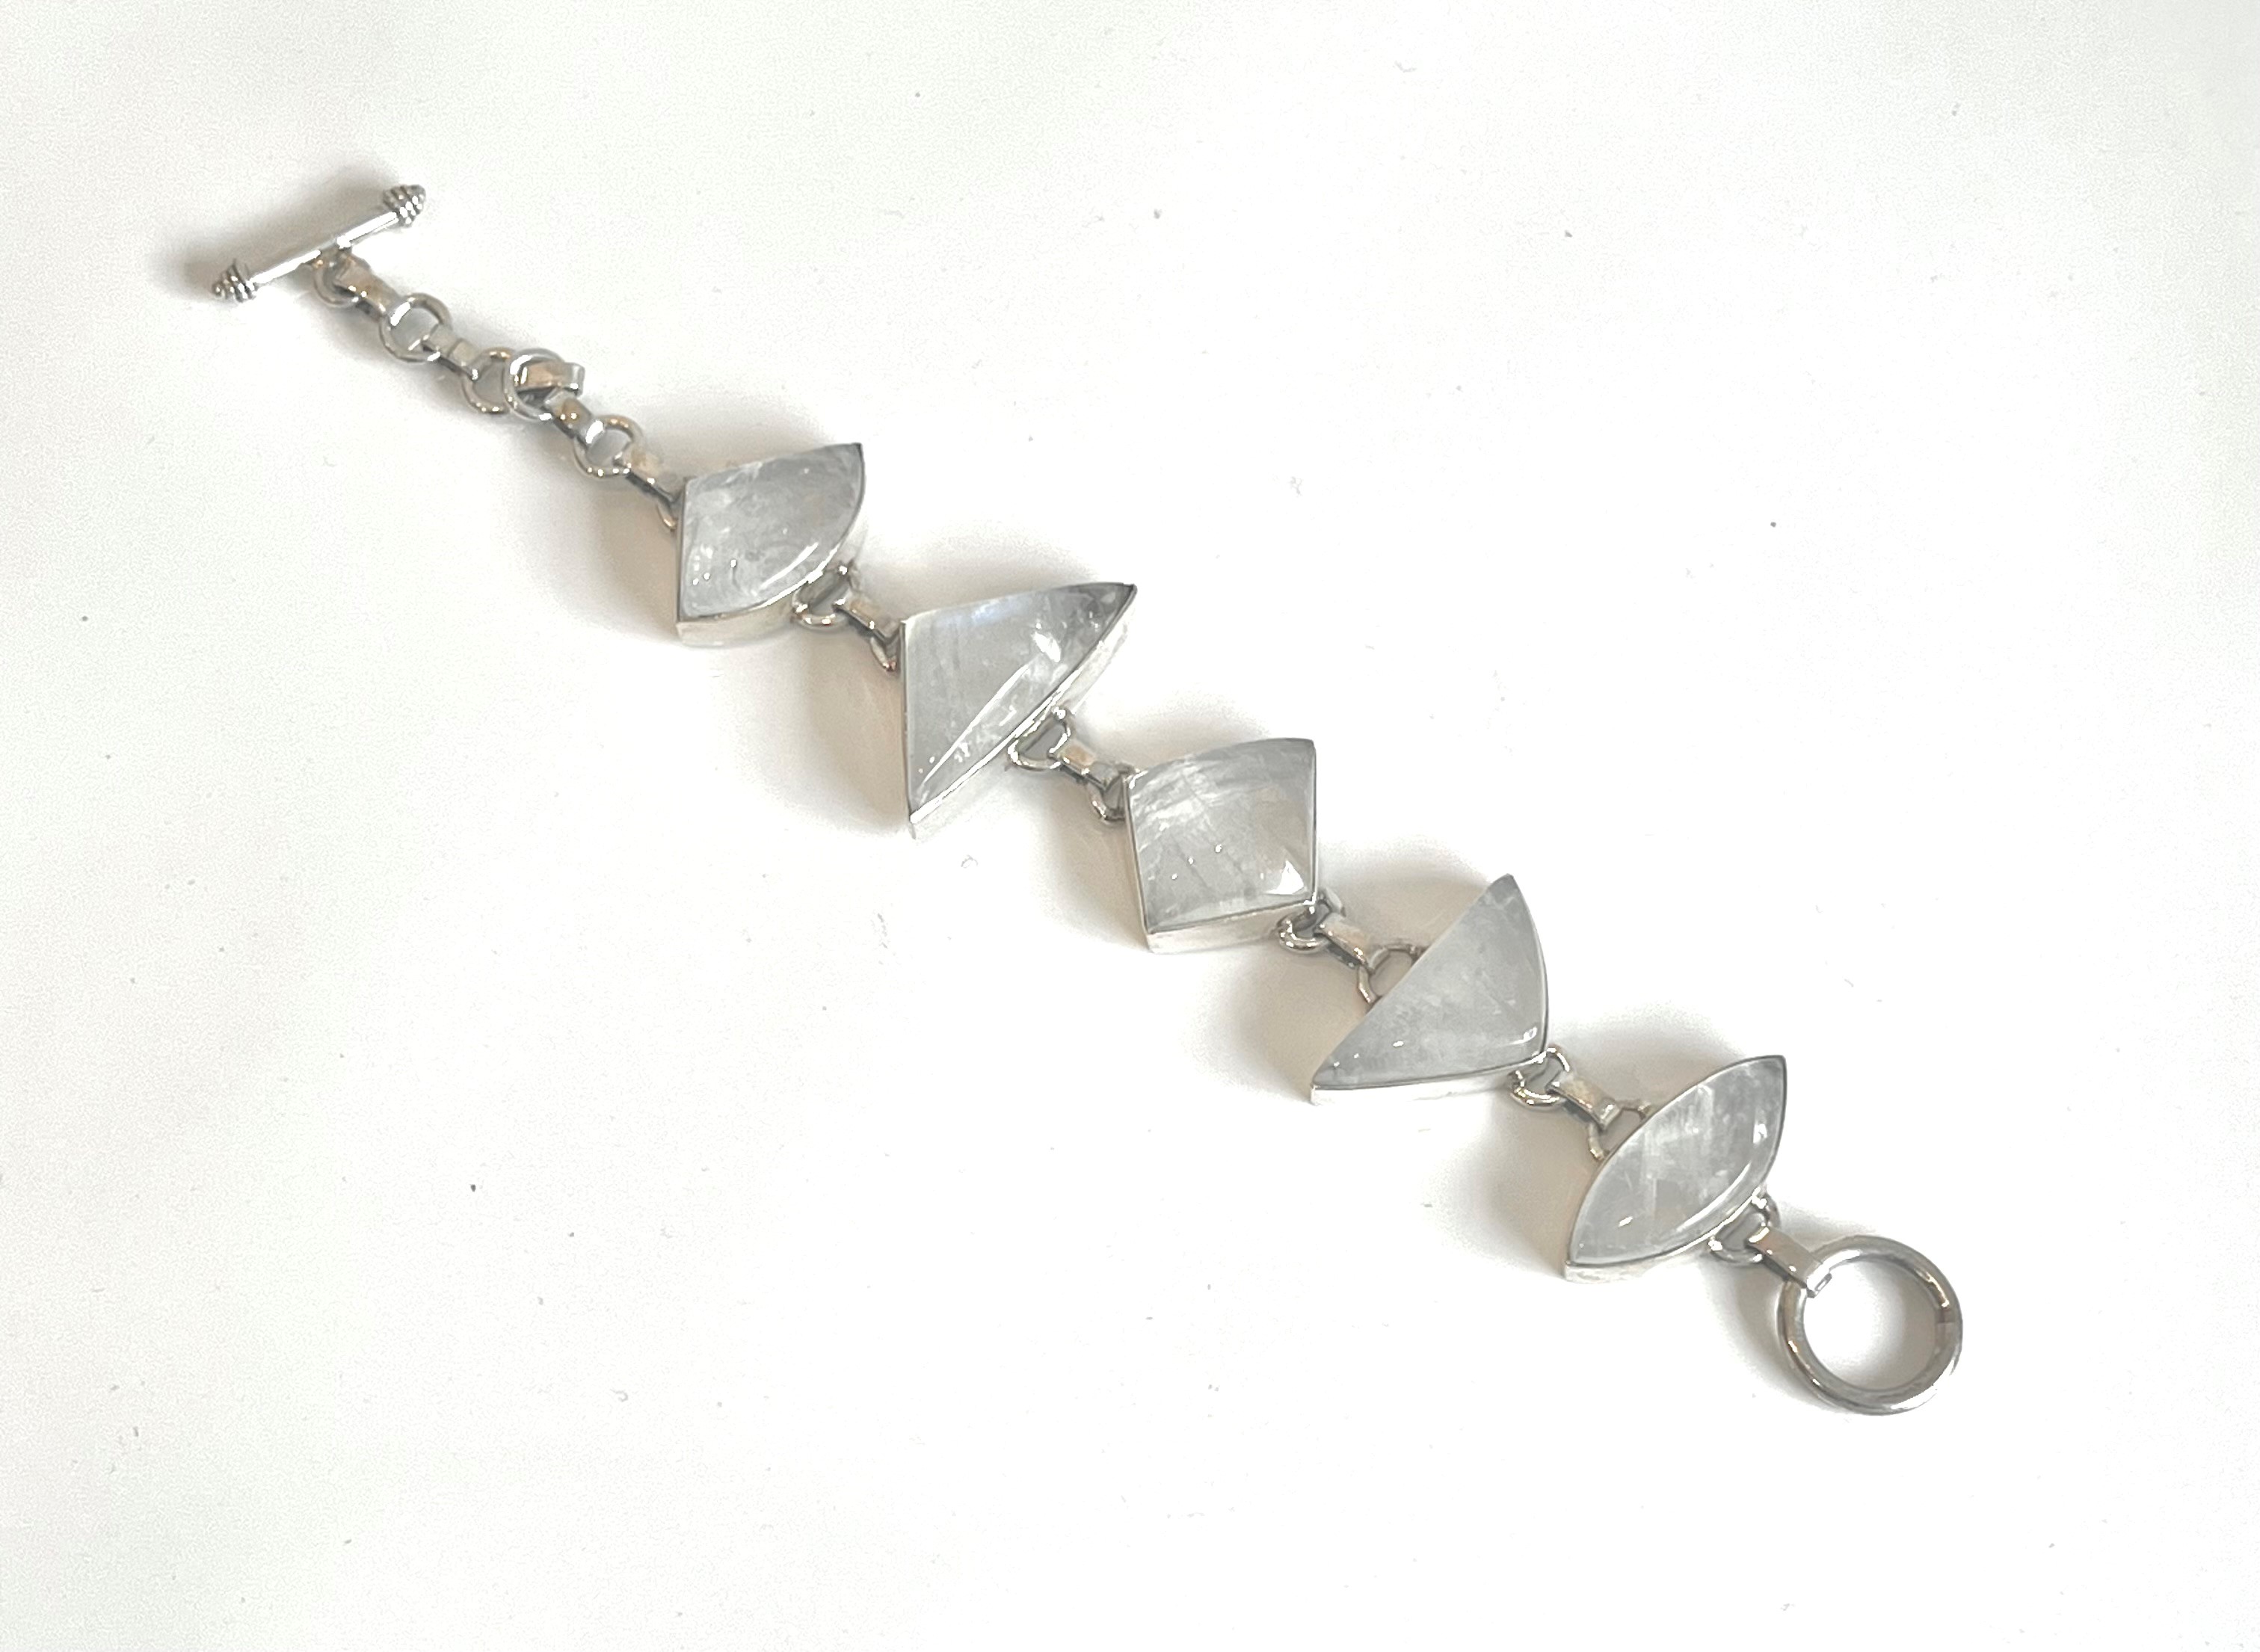 A silver and moonstone bracelet - with five different geometrically shaped cabochon moonstones in